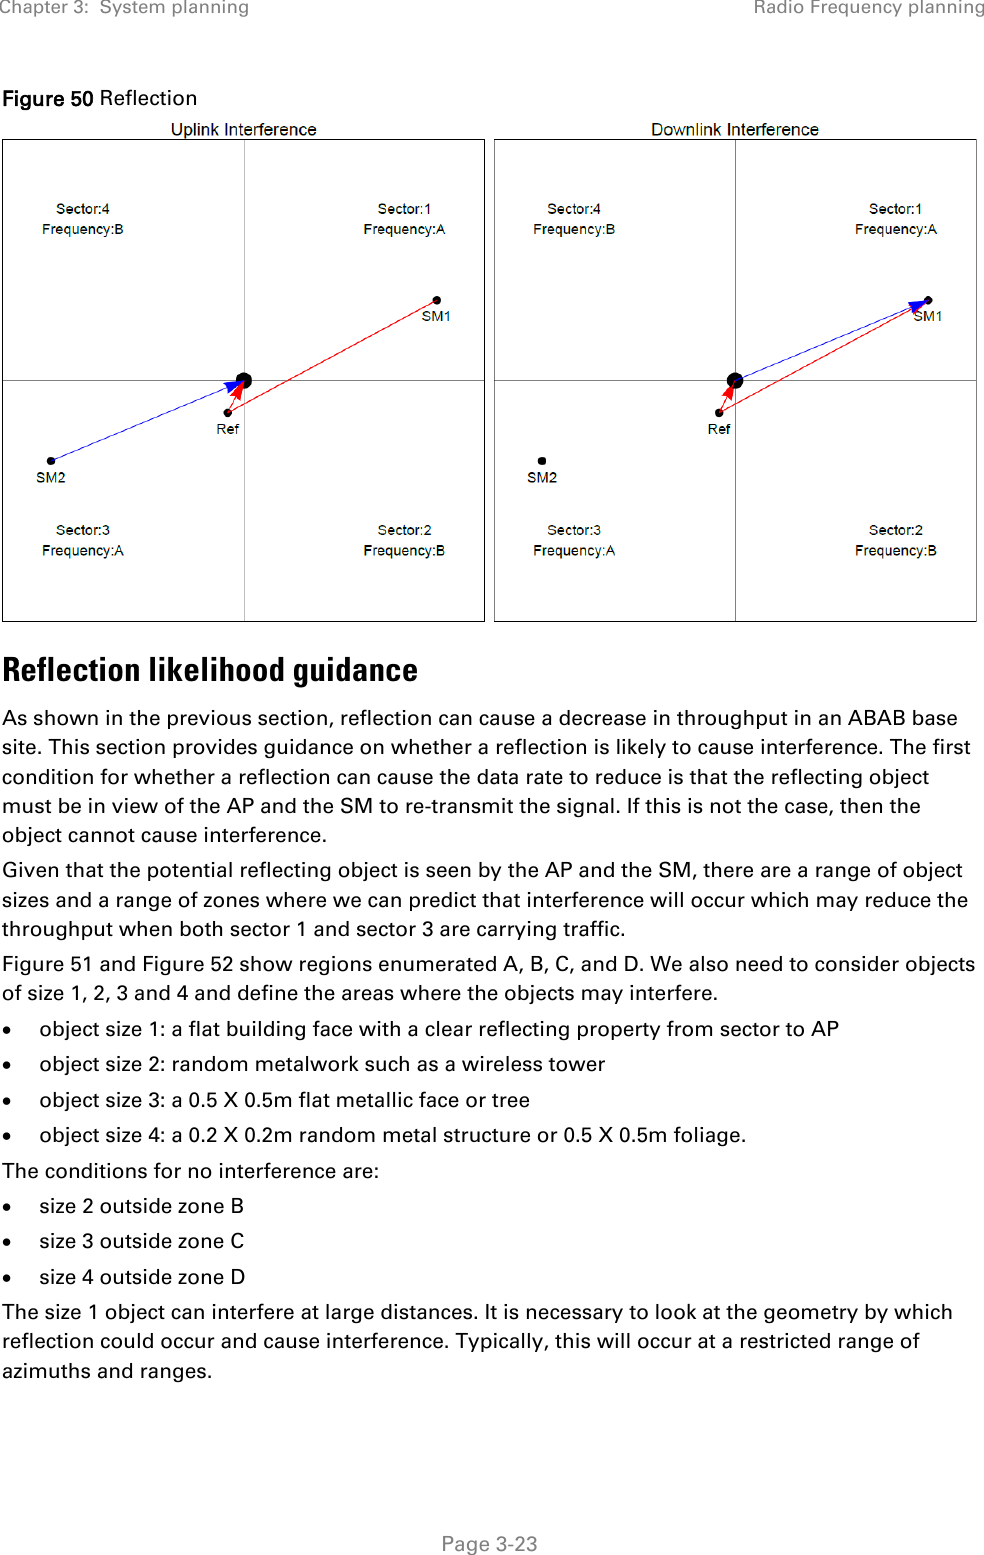 Chapter 3:  System planning Radio Frequency planning   Page 3-23 Figure 50 Reflection  Reflection likelihood guidance As shown in the previous section, reflection can cause a decrease in throughput in an ABAB base site. This section provides guidance on whether a reflection is likely to cause interference. The first condition for whether a reflection can cause the data rate to reduce is that the reflecting object must be in view of the AP and the SM to re-transmit the signal. If this is not the case, then the object cannot cause interference. Given that the potential reflecting object is seen by the AP and the SM, there are a range of object sizes and a range of zones where we can predict that interference will occur which may reduce the throughput when both sector 1 and sector 3 are carrying traffic.  Figure 51 and Figure 52 show regions enumerated A, B, C, and D. We also need to consider objects of size 1, 2, 3 and 4 and define the areas where the objects may interfere. • object size 1: a flat building face with a clear reflecting property from sector to AP • object size 2: random metalwork such as a wireless tower • object size 3: a 0.5 X 0.5m flat metallic face or tree • object size 4: a 0.2 X 0.2m random metal structure or 0.5 X 0.5m foliage. The conditions for no interference are: • size 2 outside zone B • size 3 outside zone C • size 4 outside zone D The size 1 object can interfere at large distances. It is necessary to look at the geometry by which reflection could occur and cause interference. Typically, this will occur at a restricted range of azimuths and ranges.  